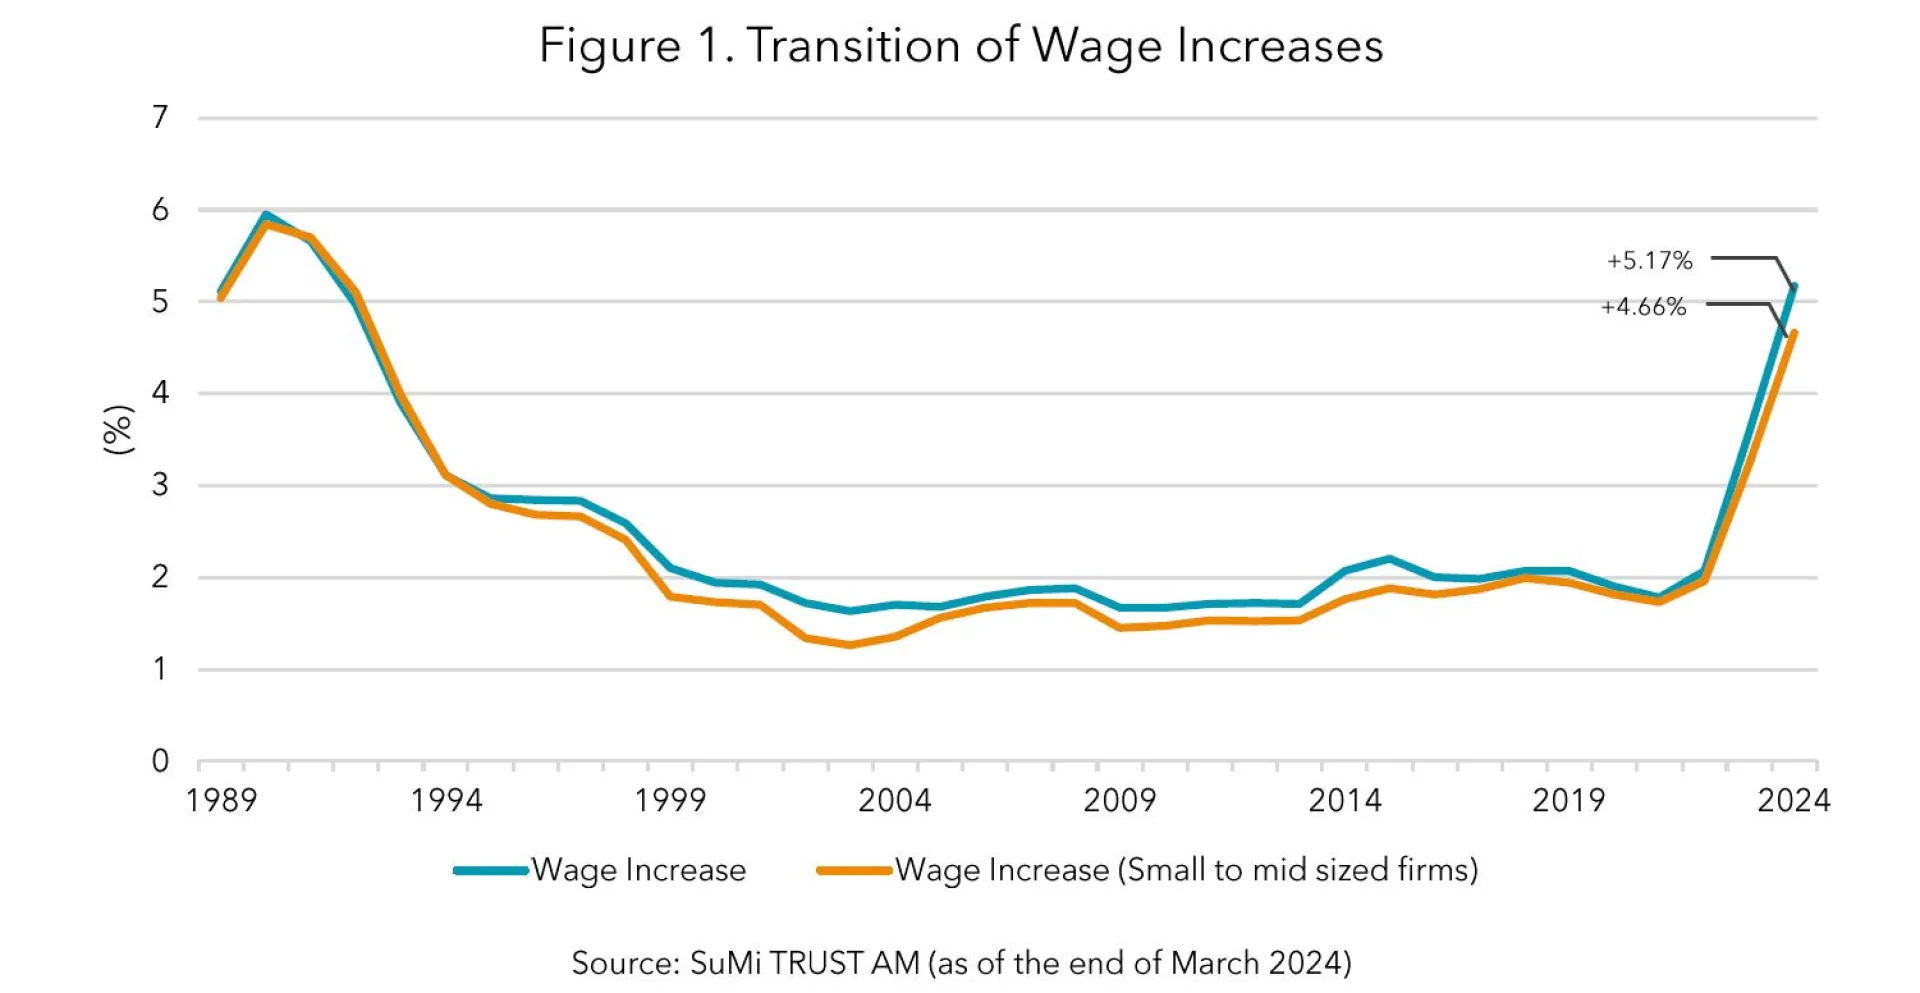 Trends in Wage Increases